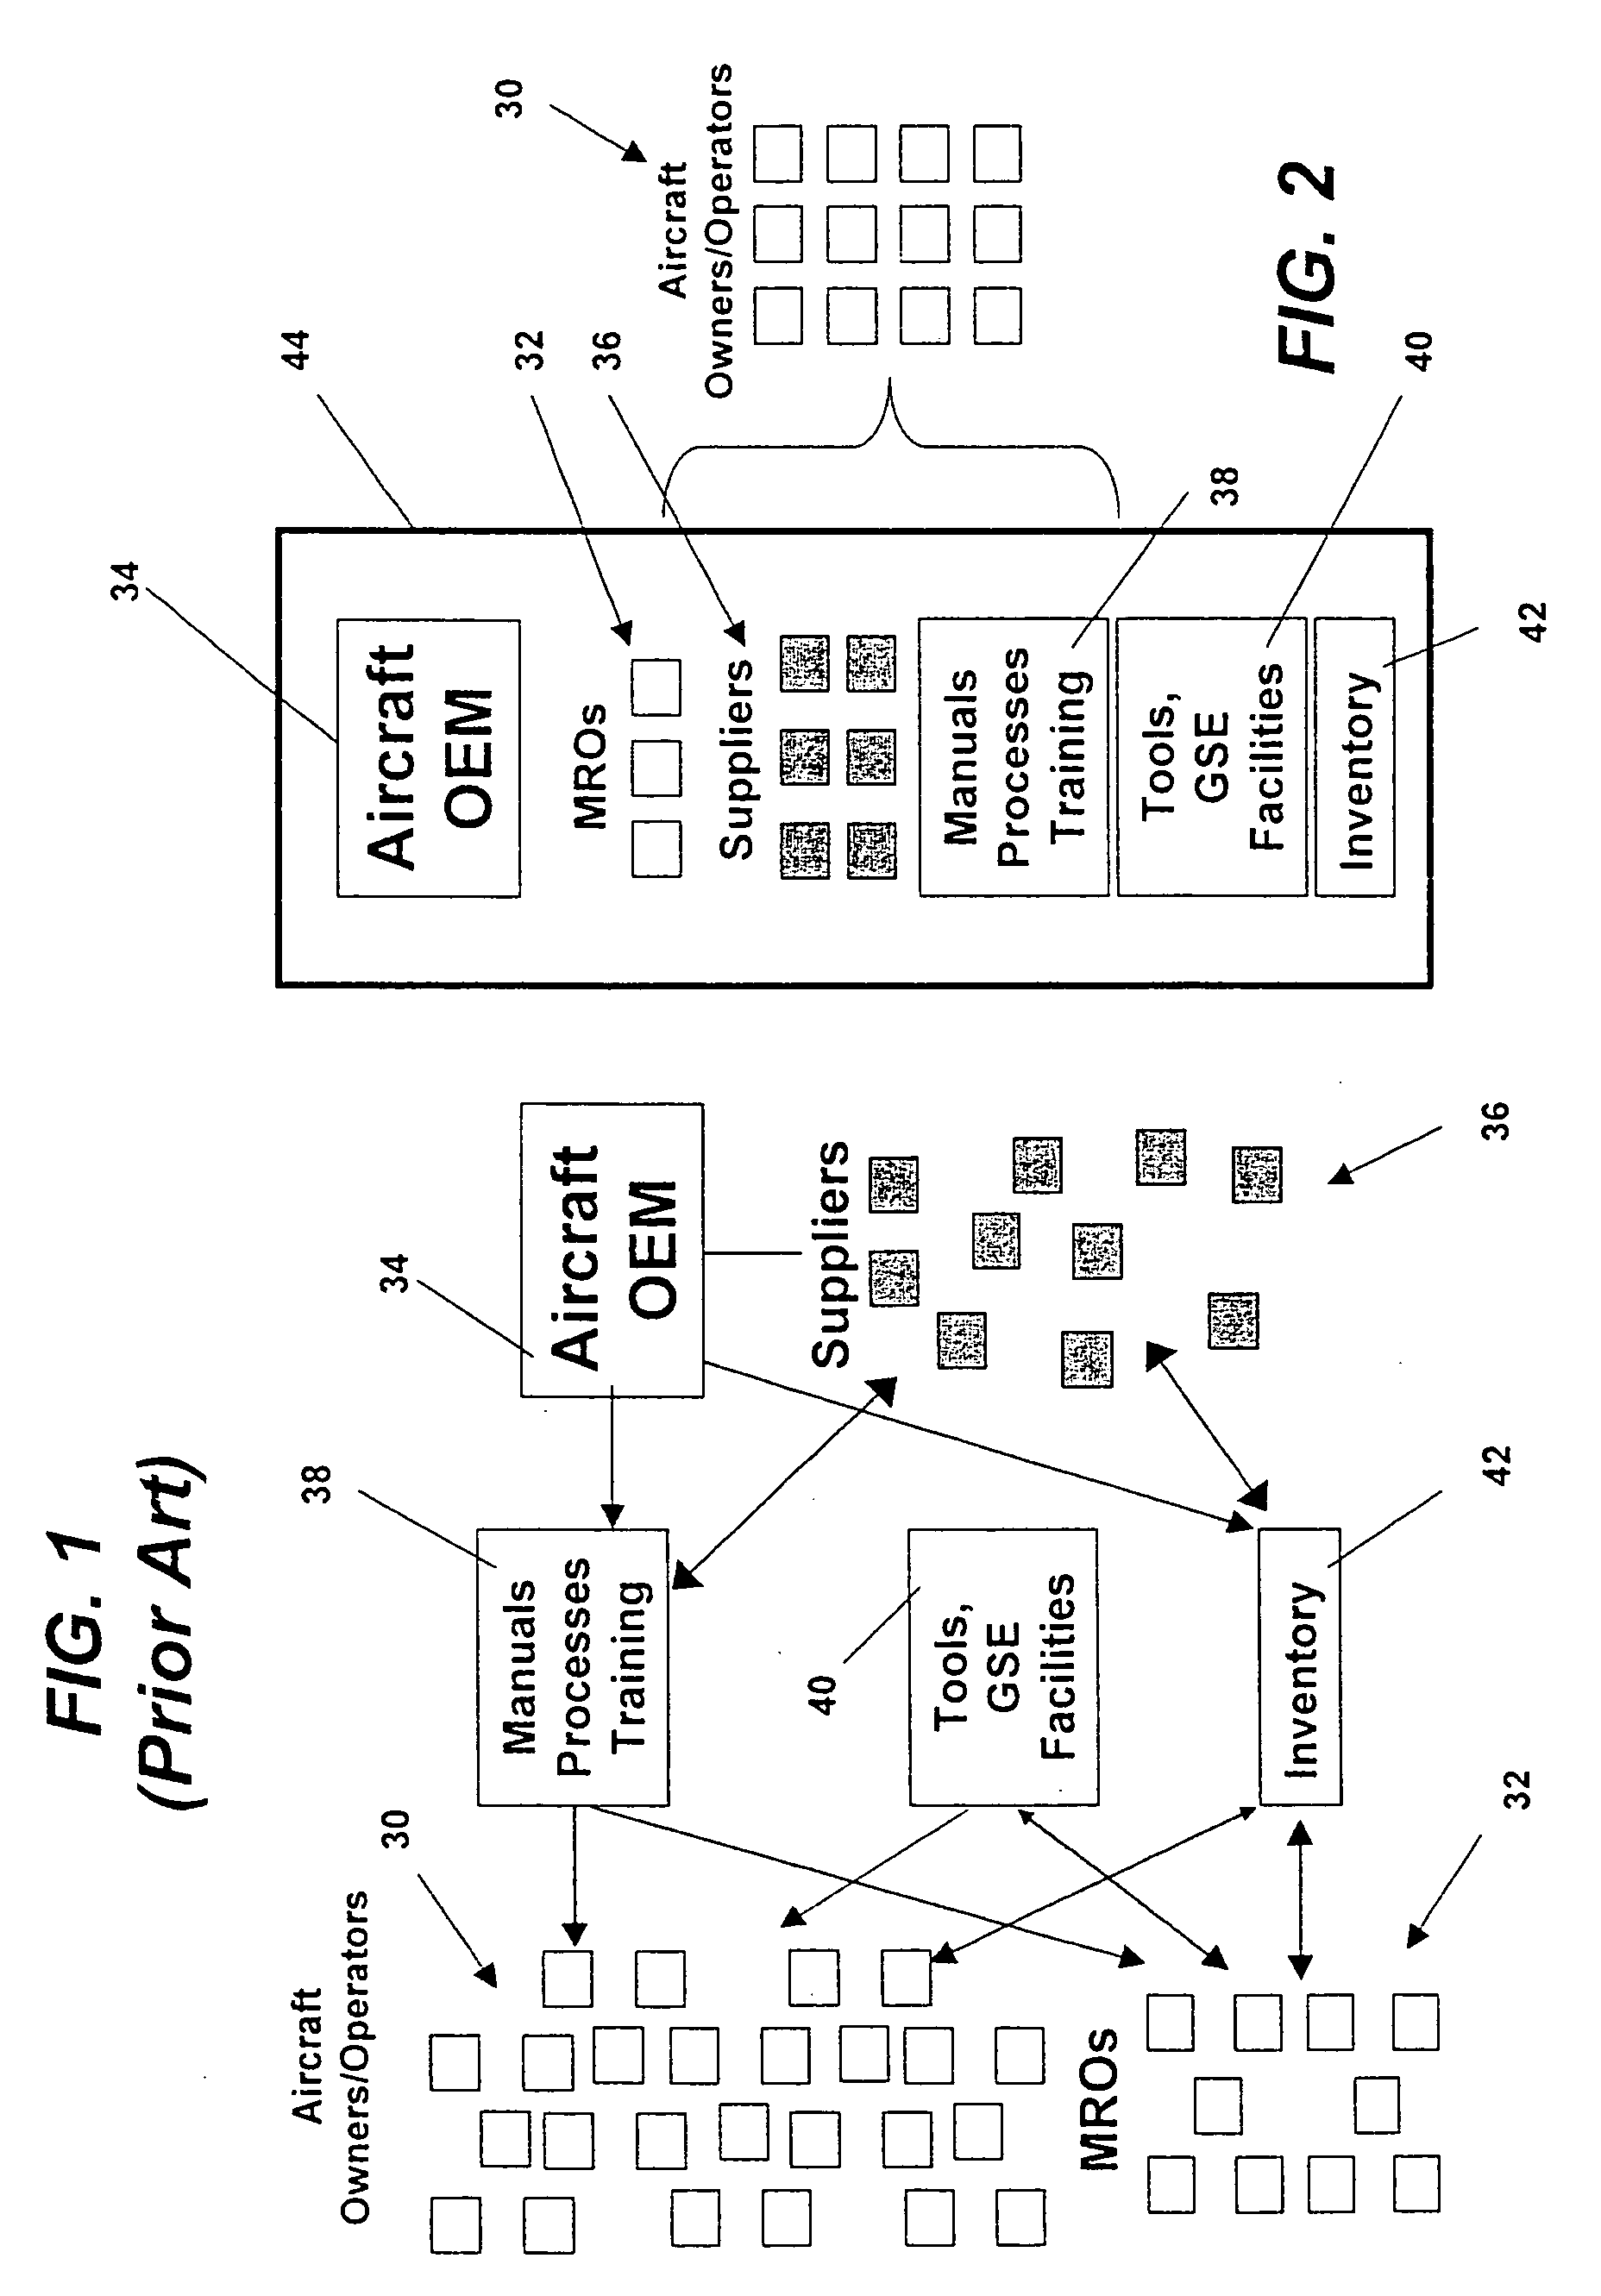 Integrated maintenance and materials service for fleet aircraft and system for determining pricing thereof